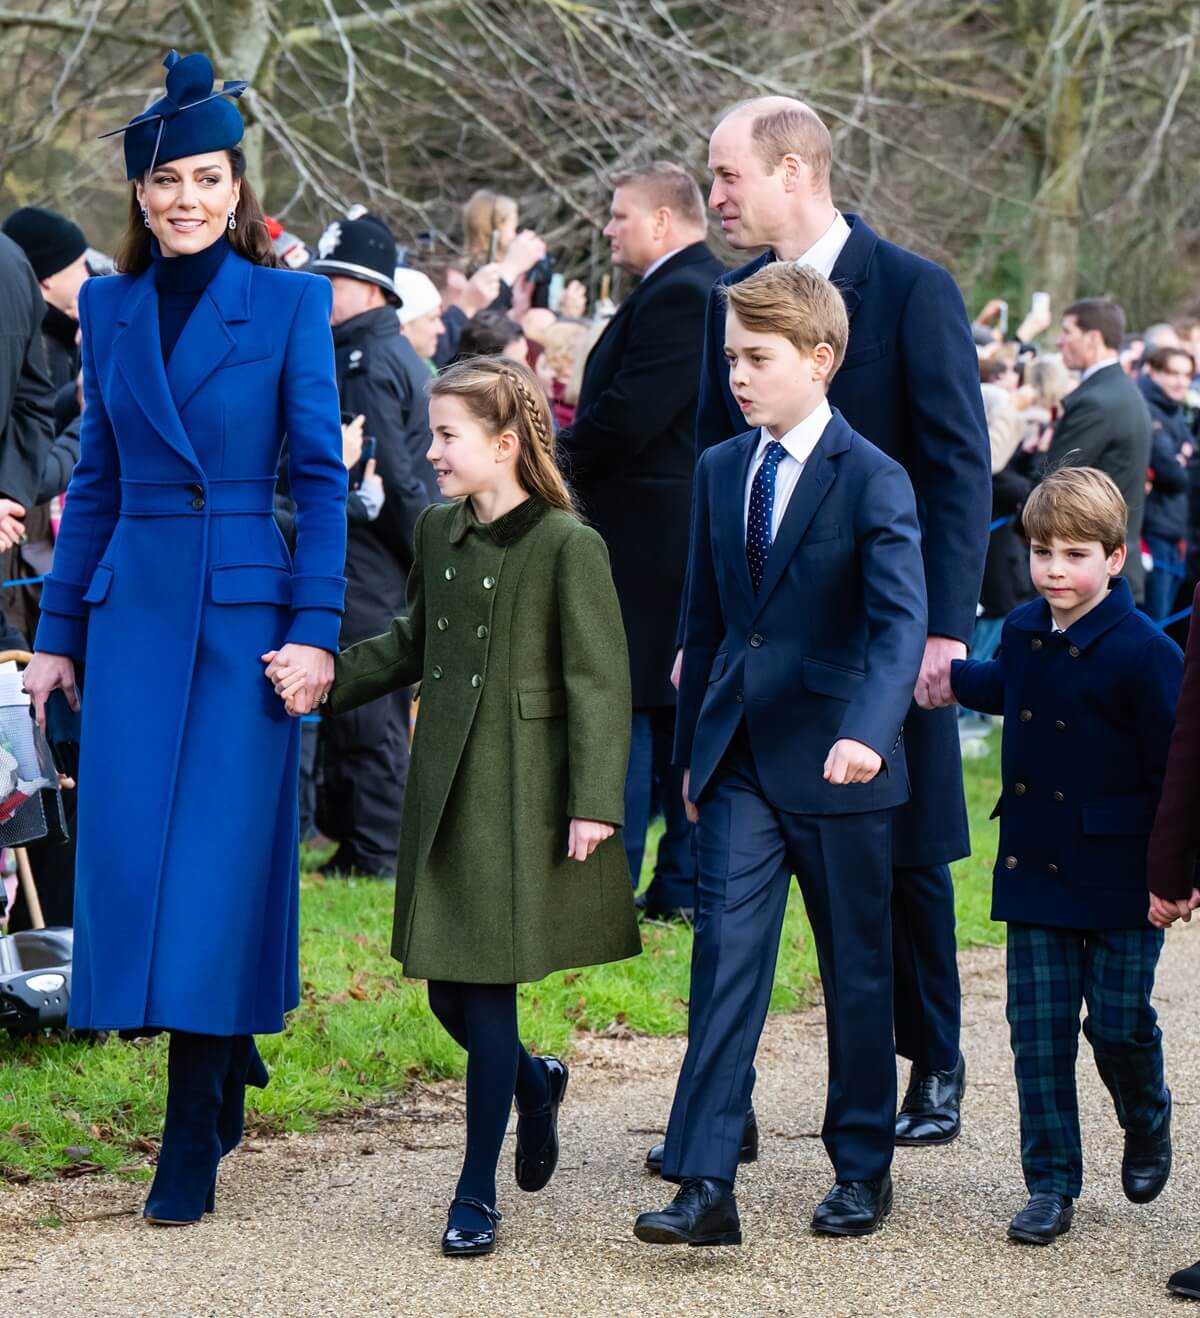 The Wales family attend the Christmas Morning Service at Sandringham